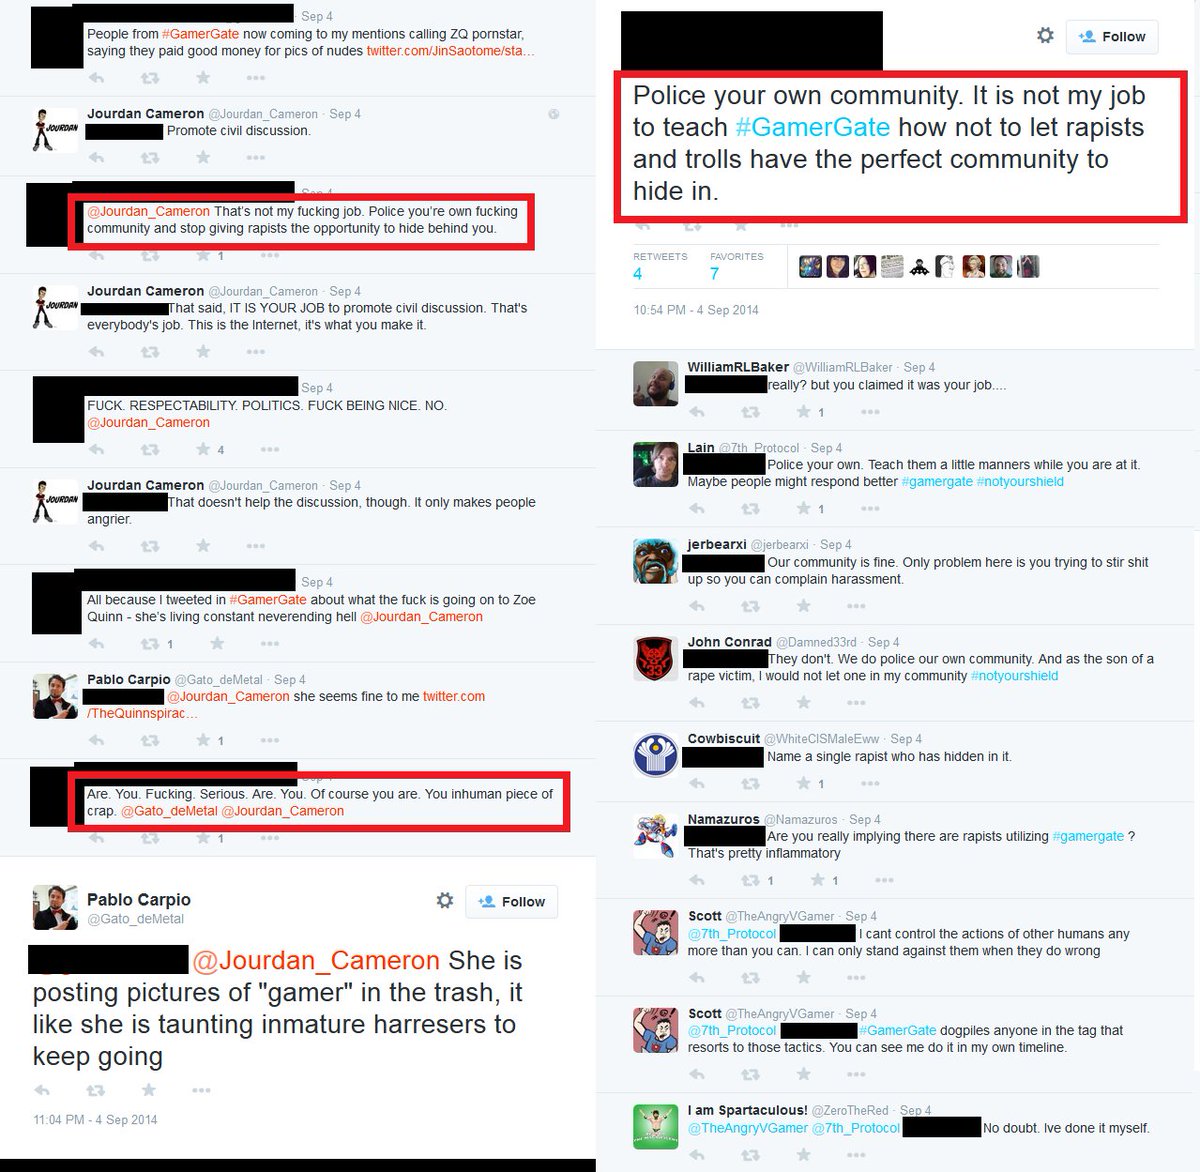  #GamerGate Trivia - Part 10: The CBC once claimed that a young woman was attacked by  #GamerGate just for tweeting support for Zoe Quinn when what actually happened was that she had a meltdown when someone sent her one of Quinn's nude pics and verbally abused GGers for 45 minutes.